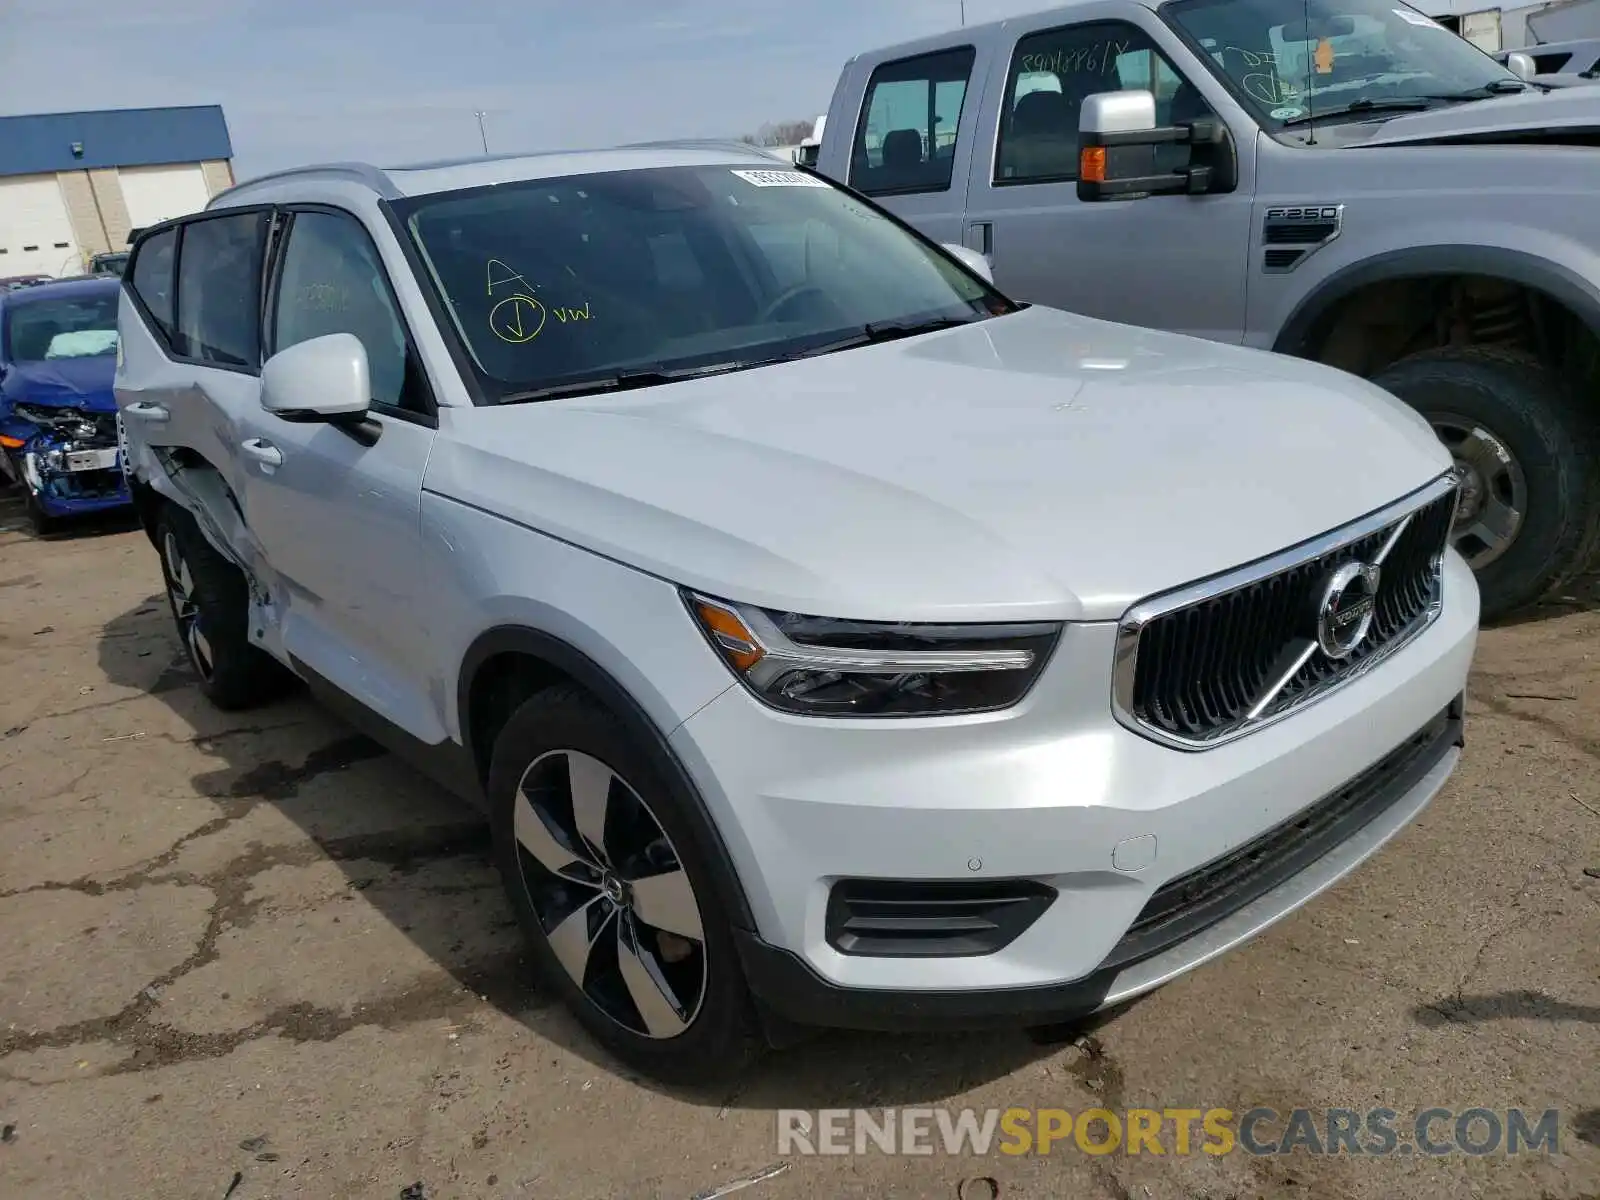 1 Photograph of a damaged car YV4162UK0L2327546 VOLVO XC40 2020